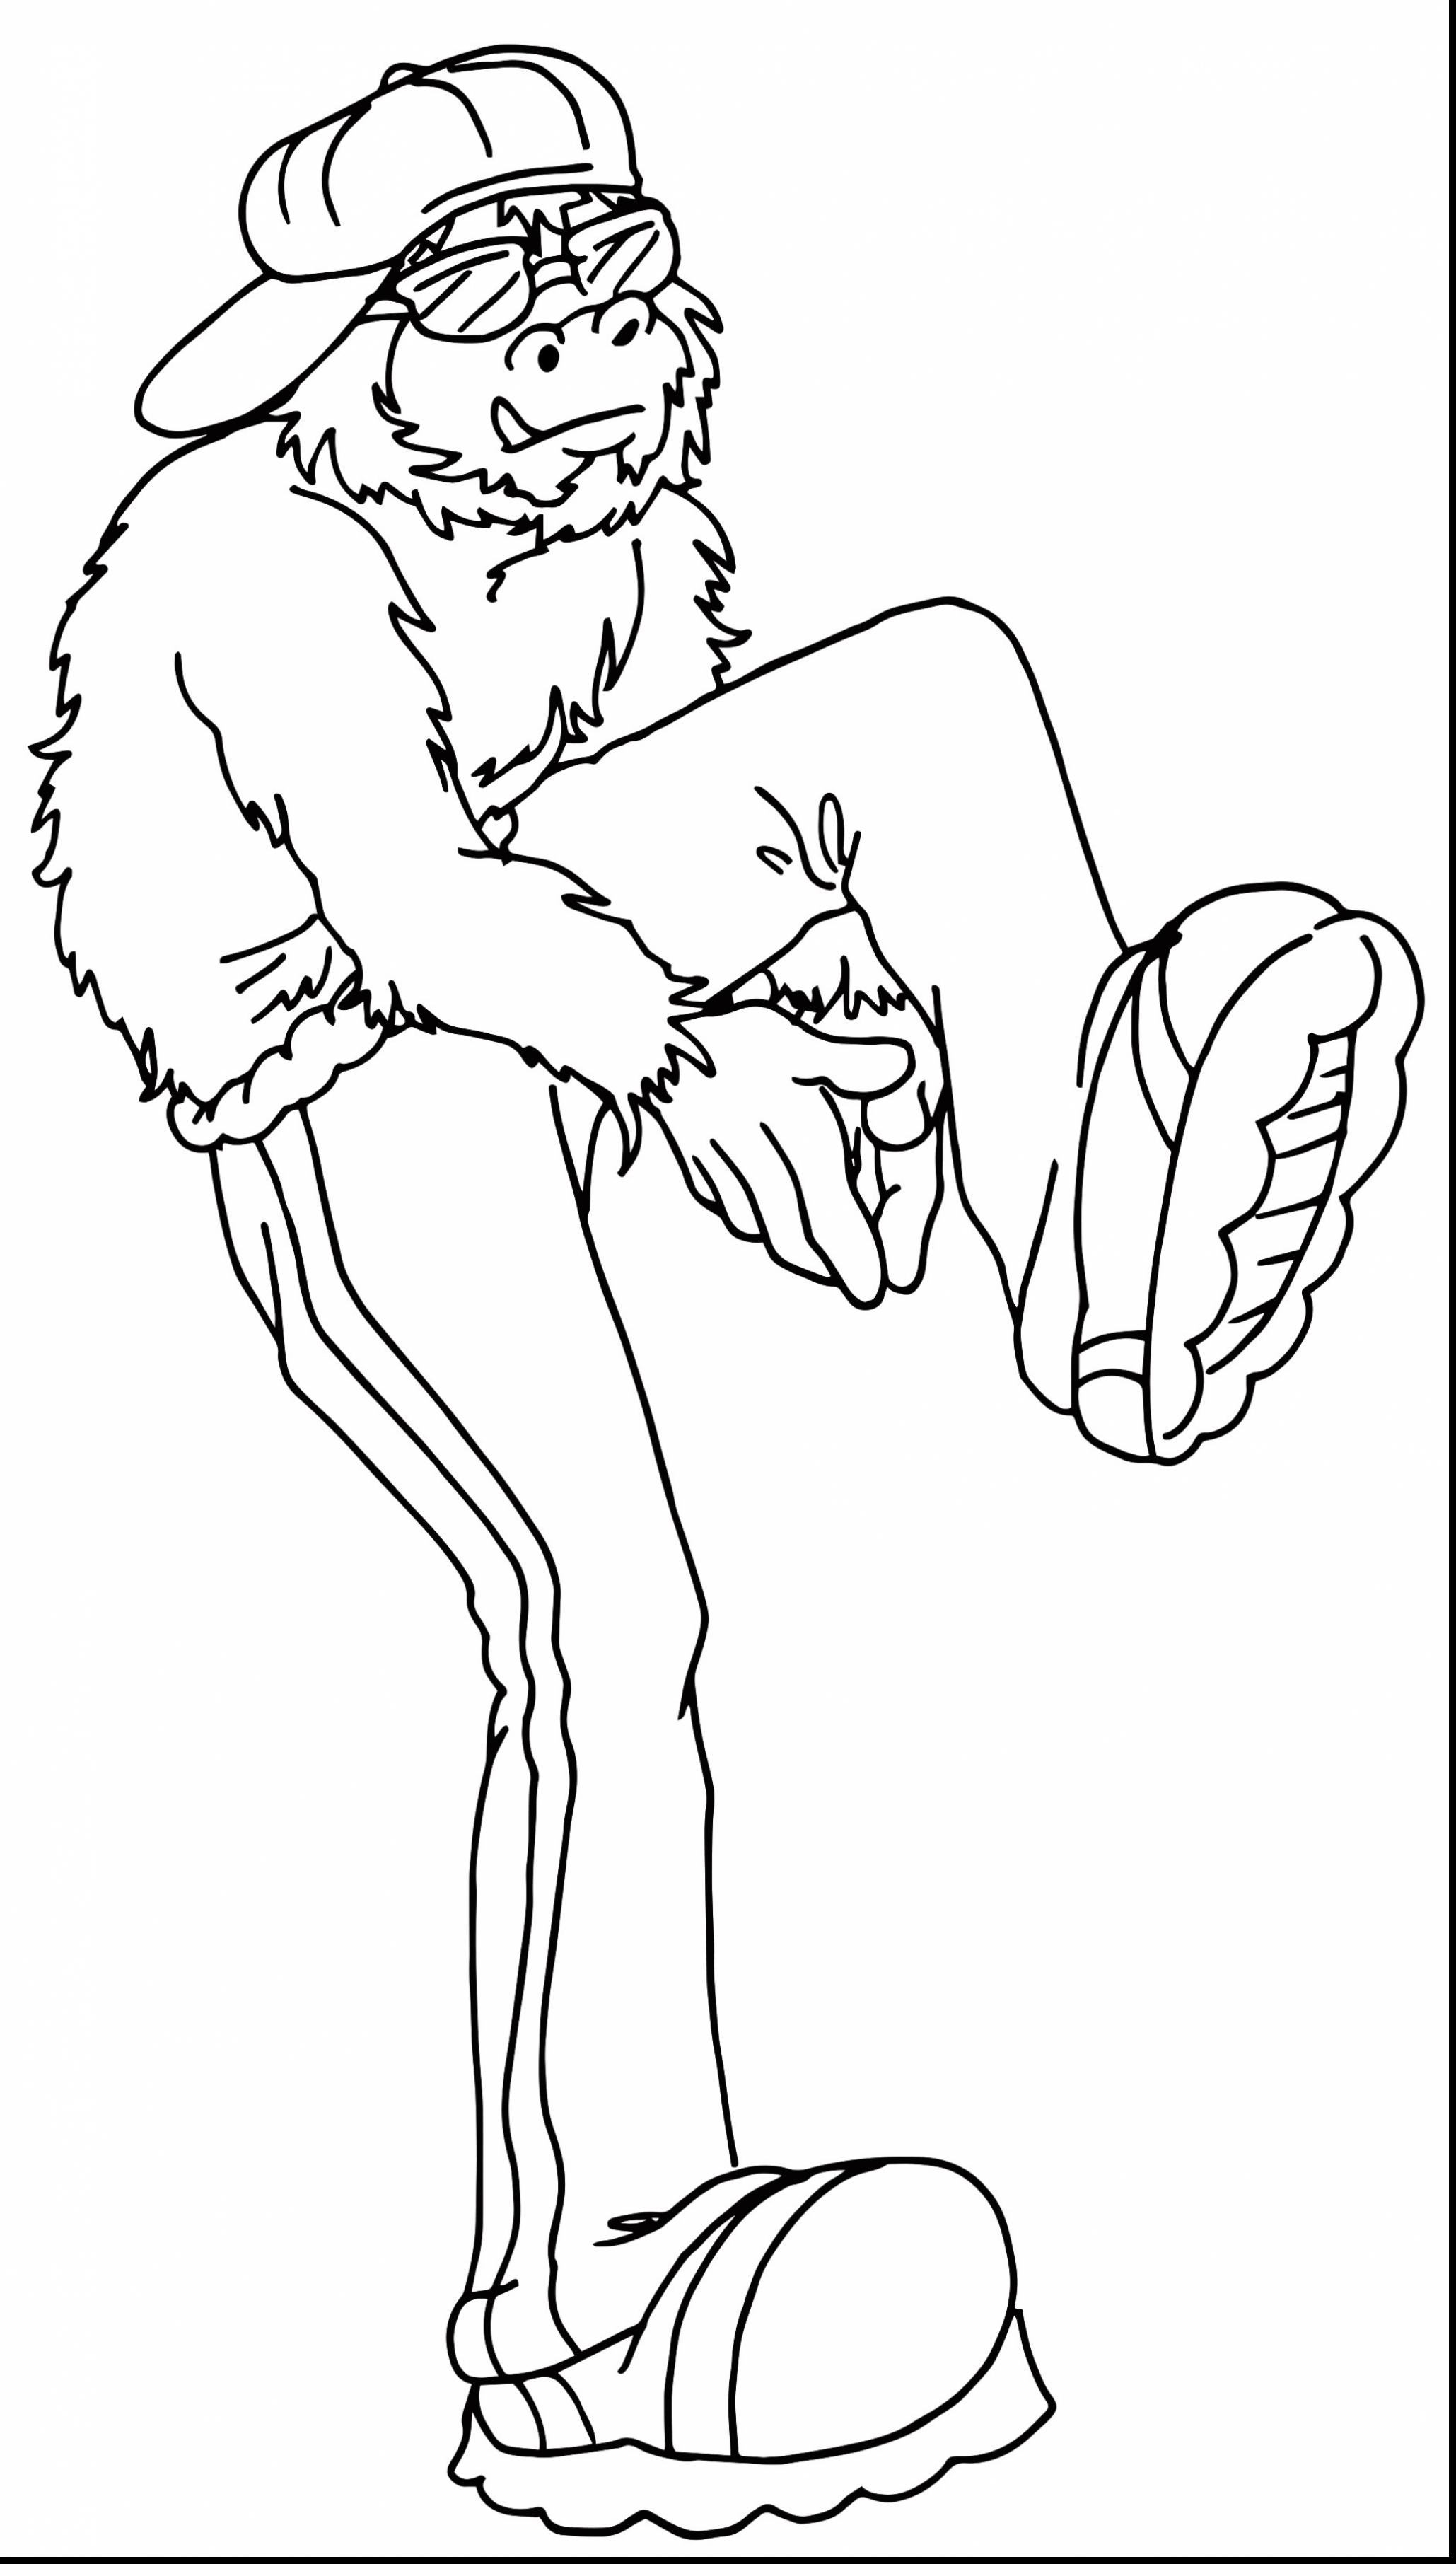 Boy Dance Coloring Pages at GetColorings.com | Free printable colorings